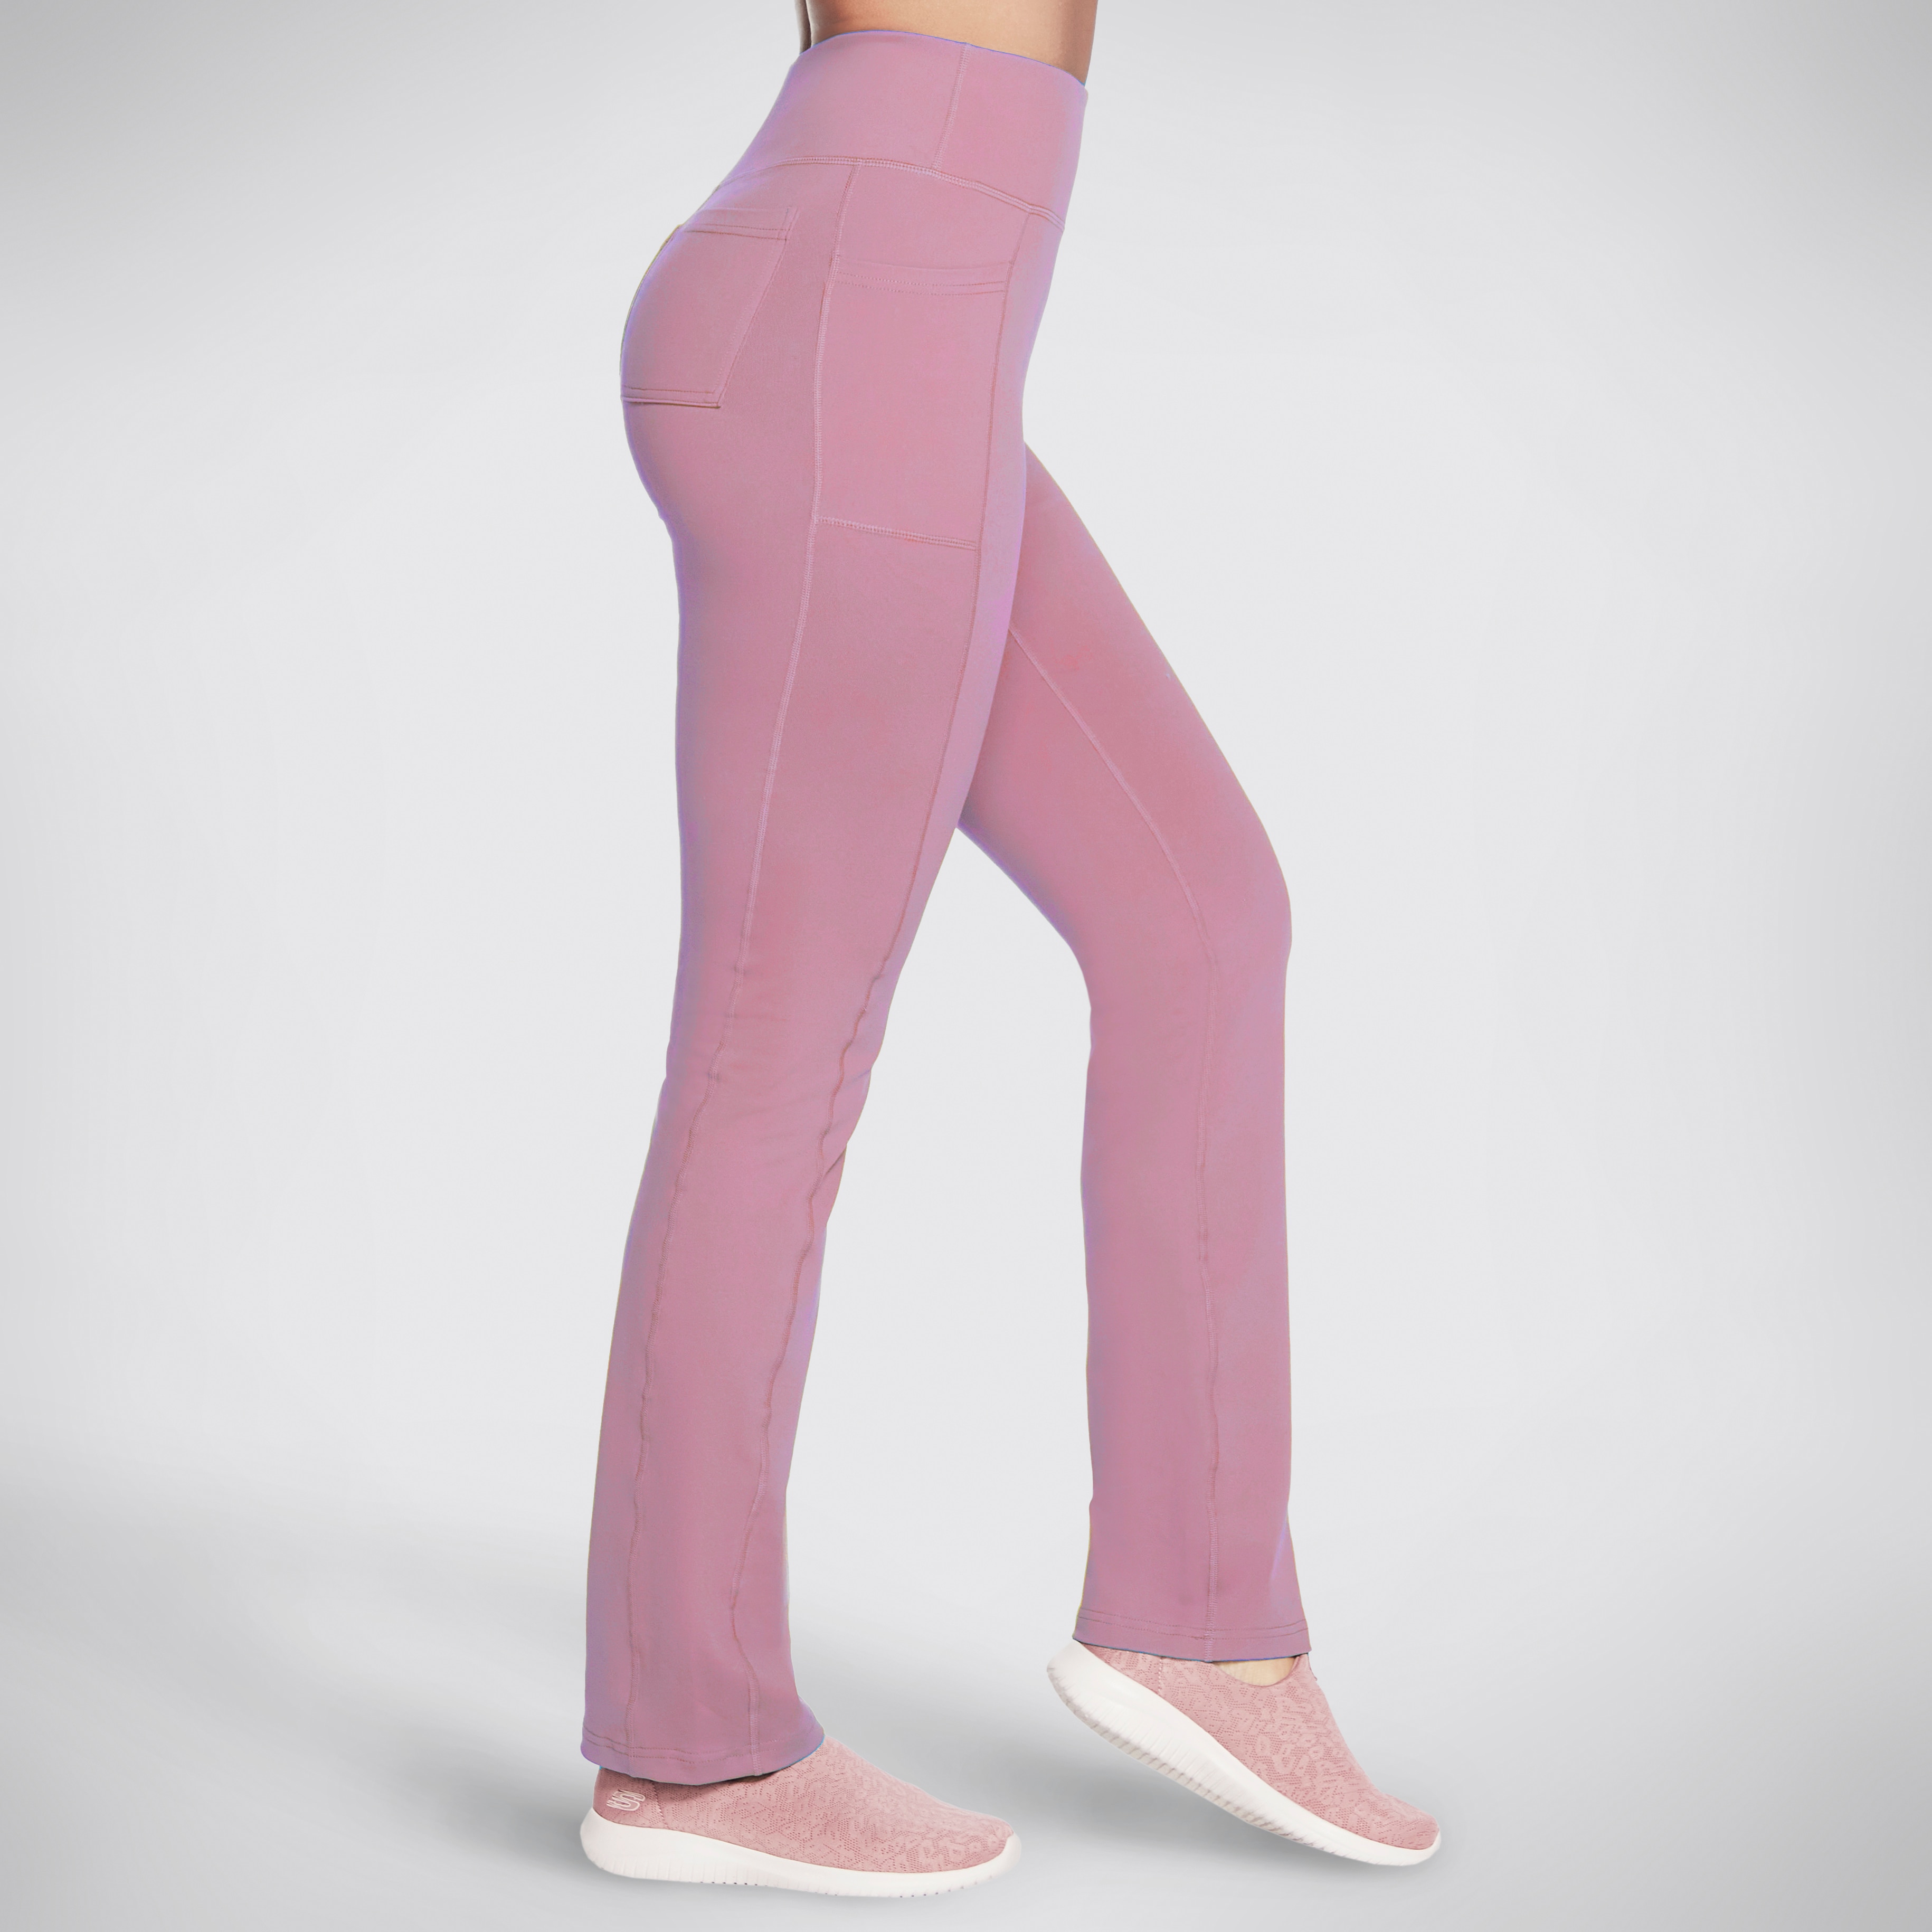 Buy a Womens Skechers Vapor High-Waisted Compression Athletic Pants Online  | TagsWeekly.com